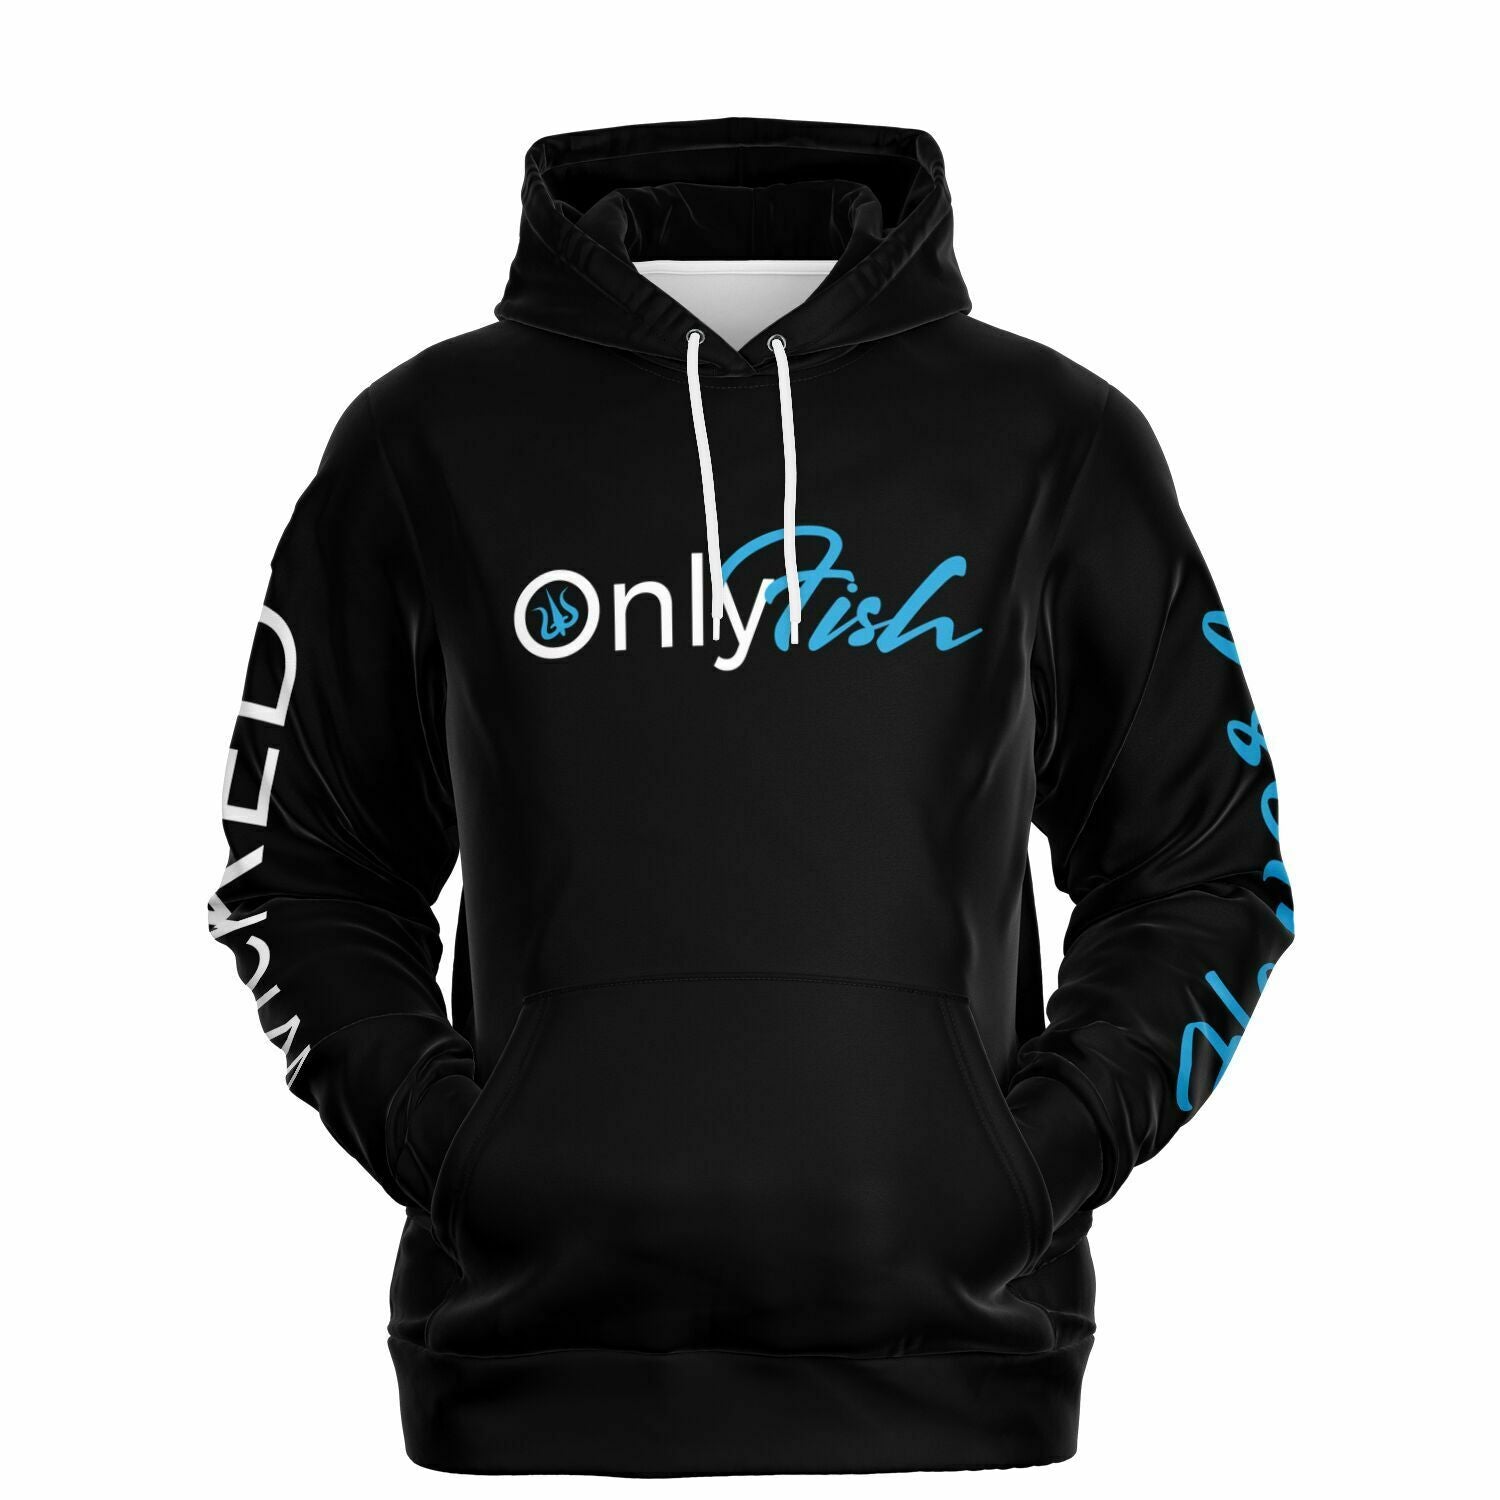 ONLY FISH HOODIE